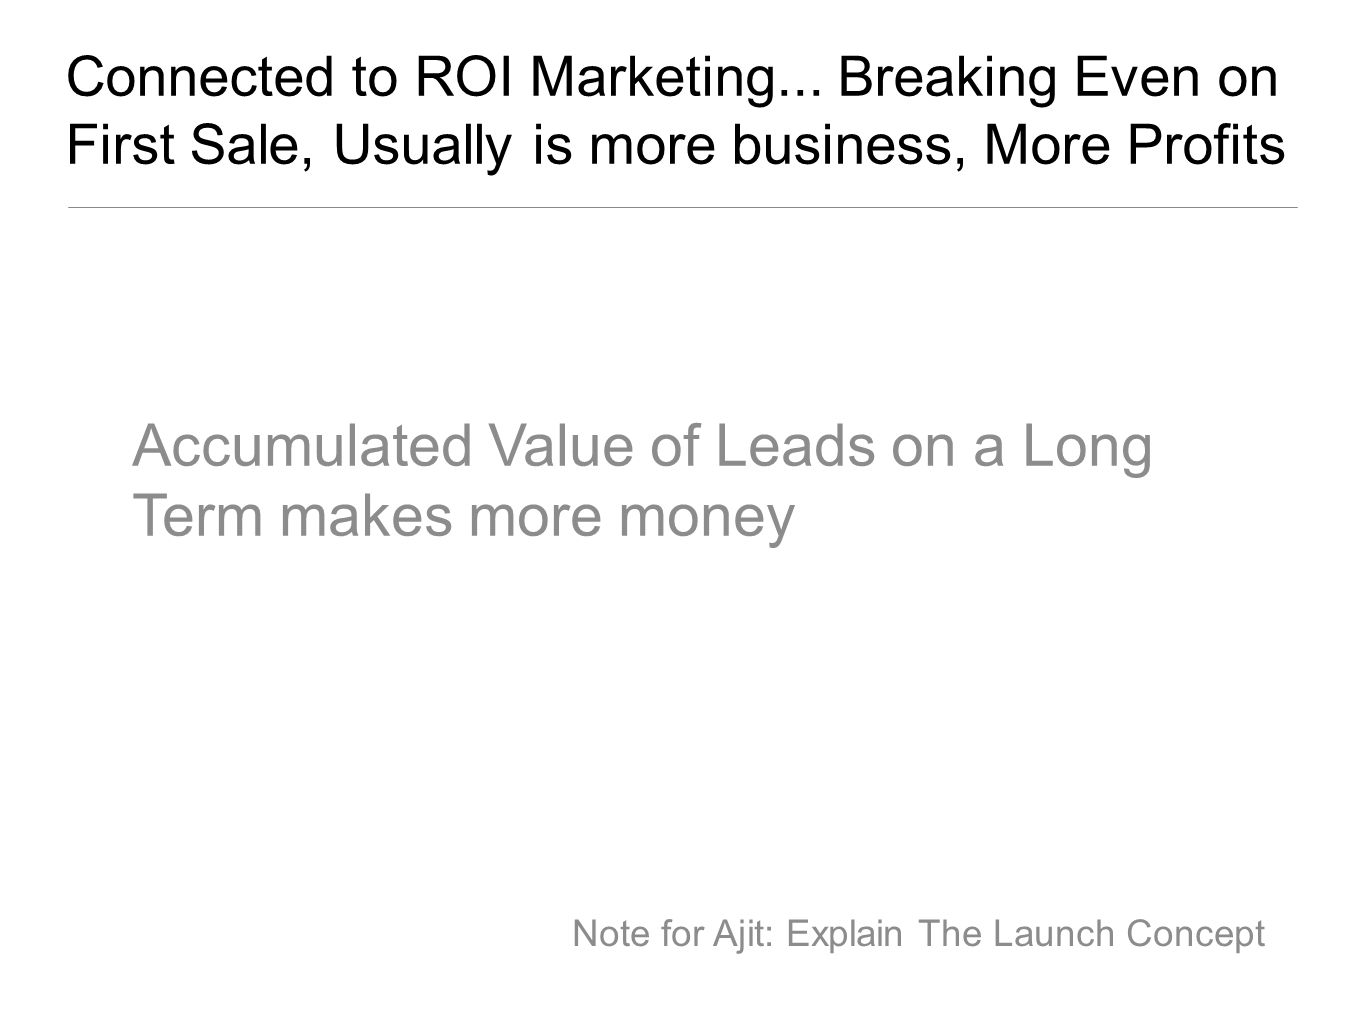 Connected to ROI Marketing...